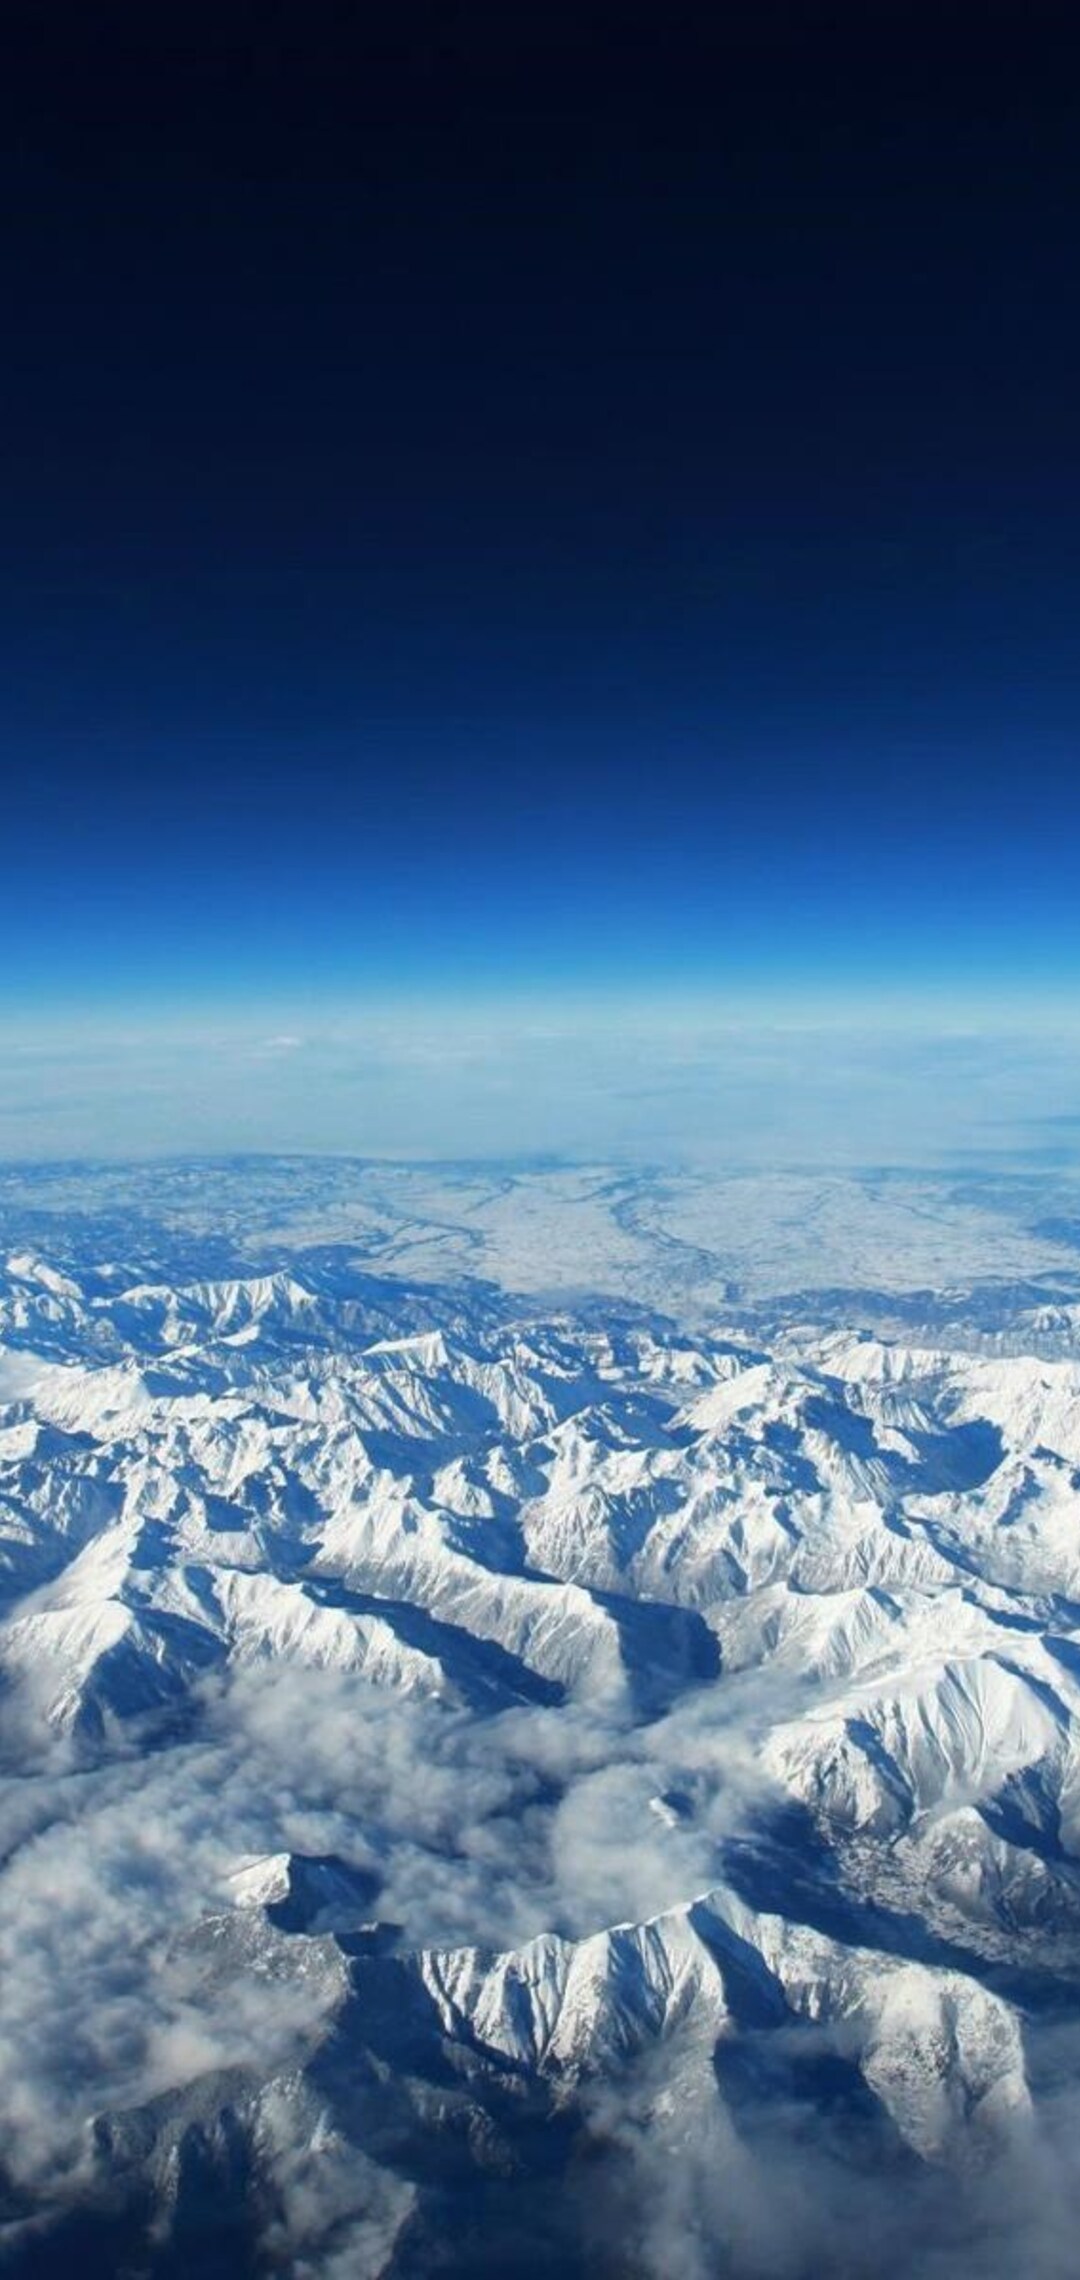 earth-mountains-range-from-top.jpg